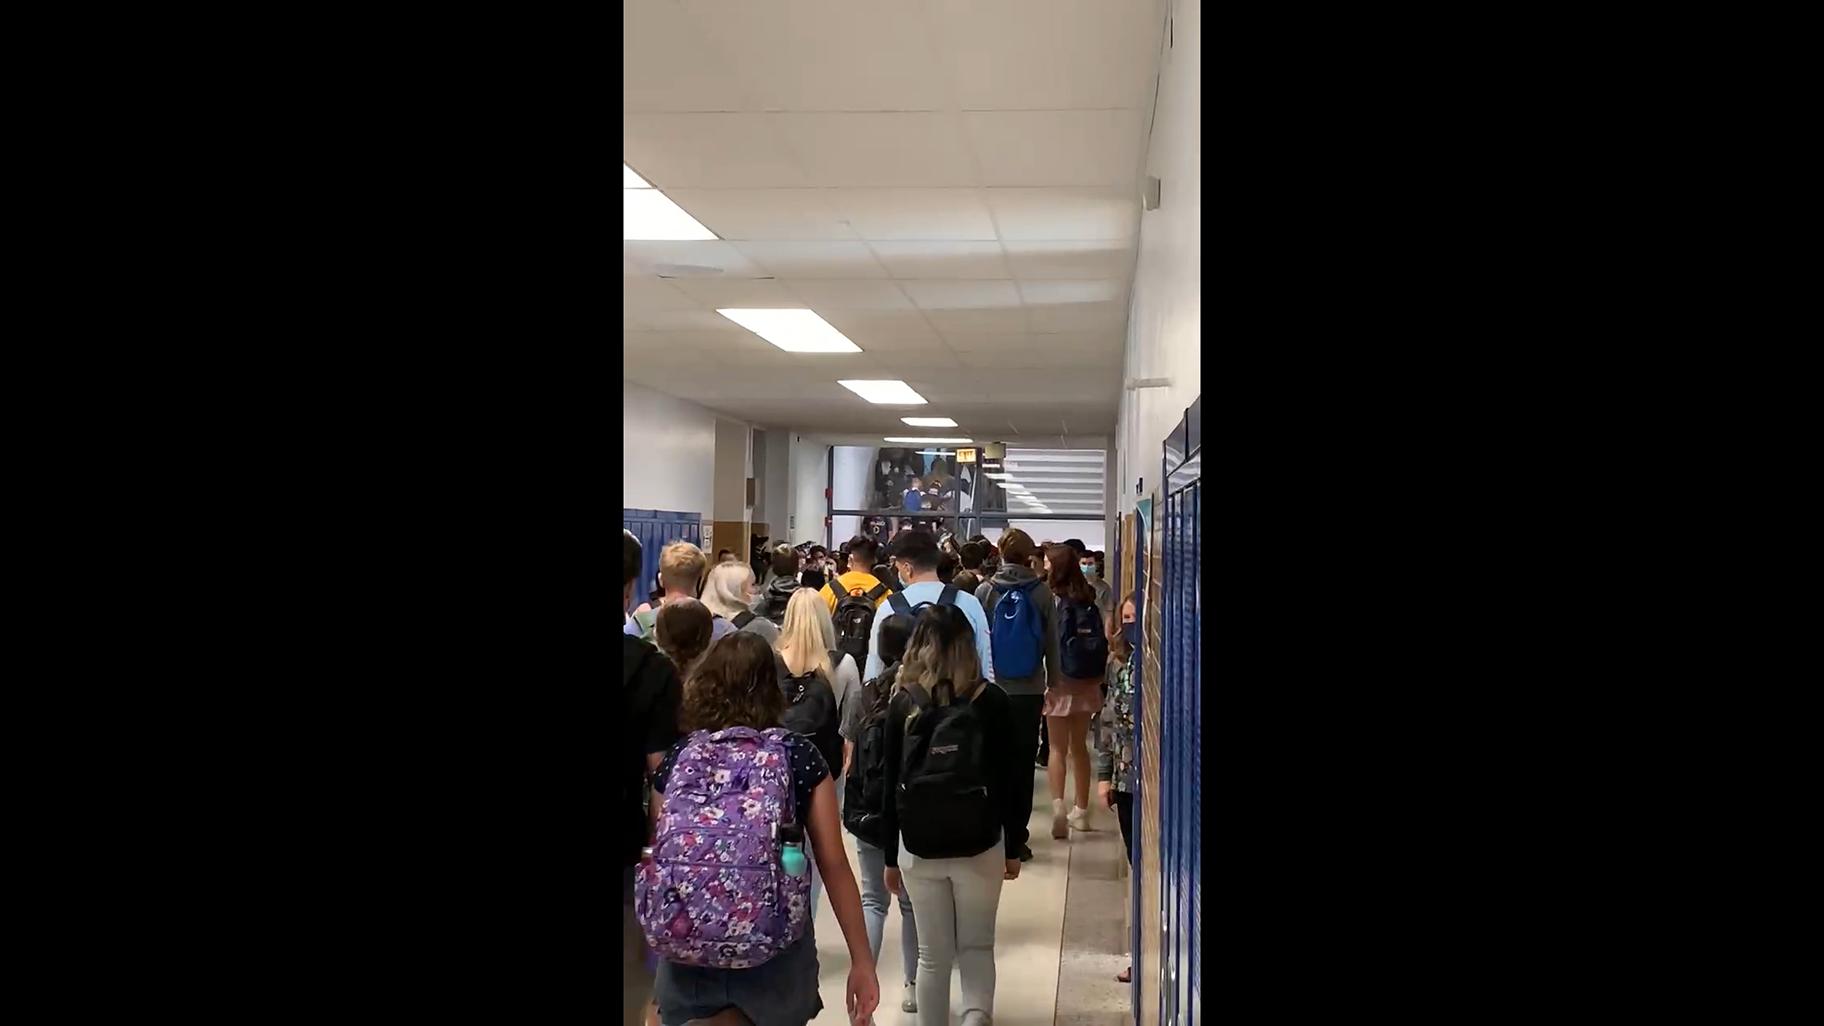 A screenshot from a video shared with WTTW News shows a crowded hallway at Taft High School